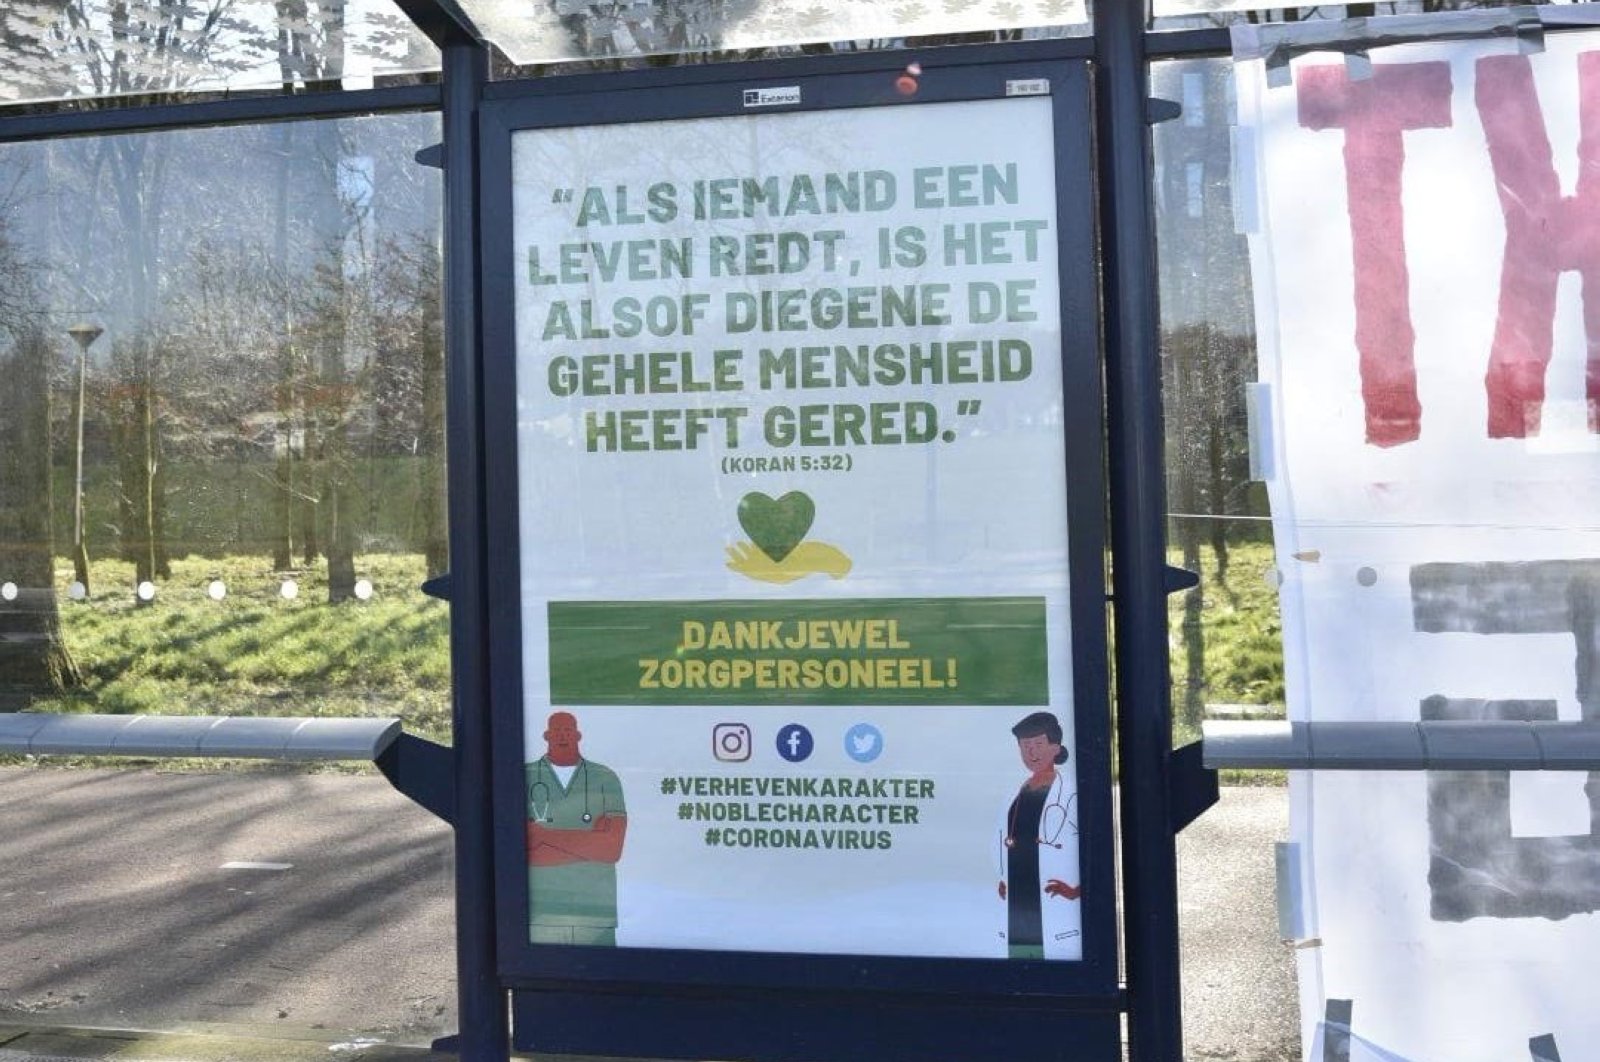 The poster is seen at a bus stop, in Amsterdam, the Netherlands, Tuesday, March 31, 2020. (AA Photo)